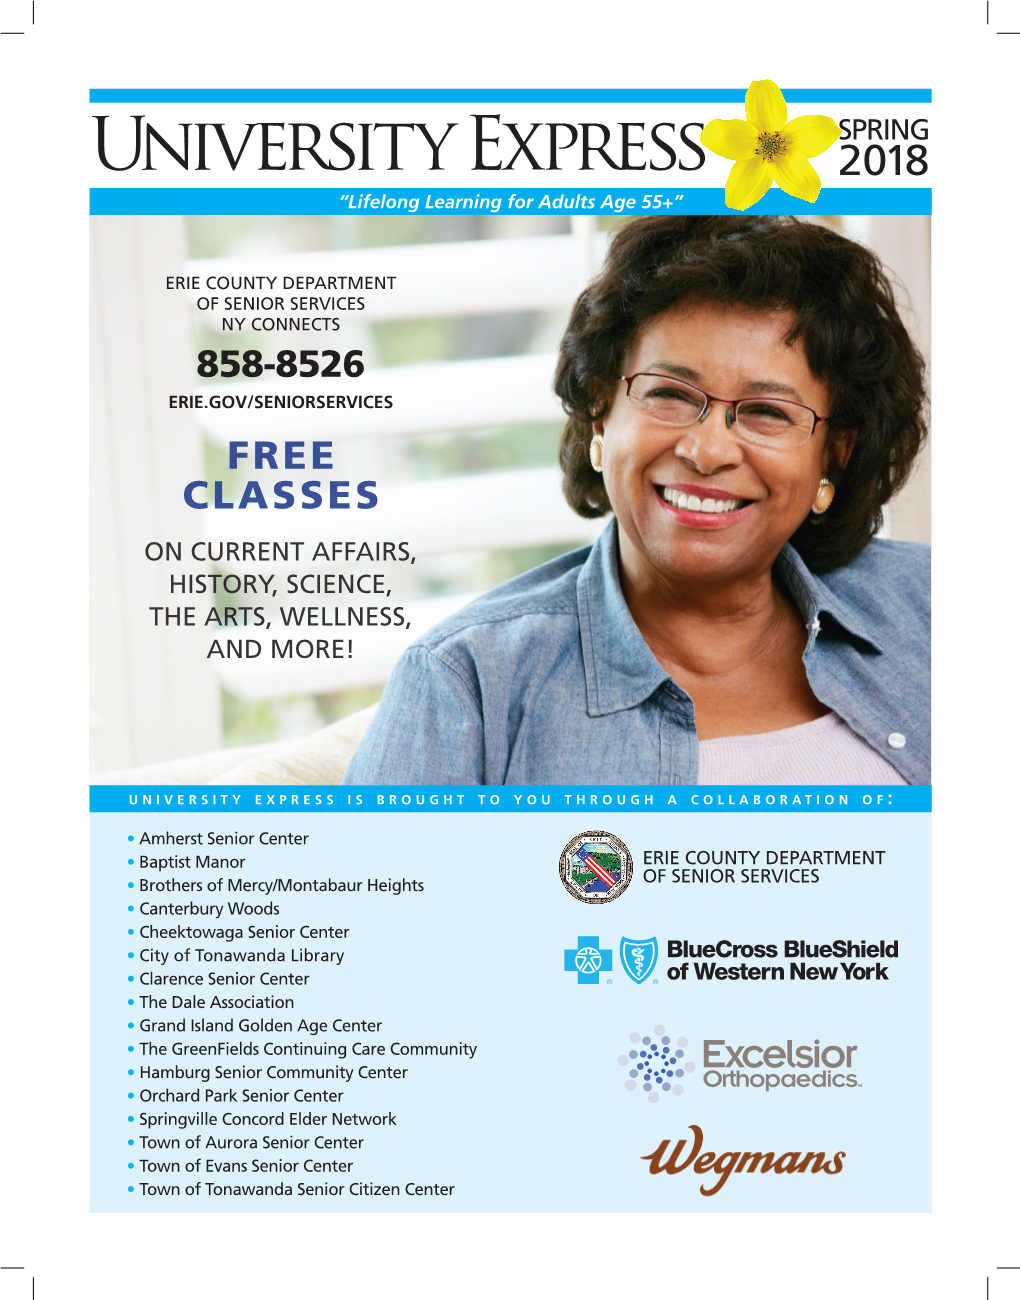 University Express 2018 “Lifelong Learning for Adults Age 55+”